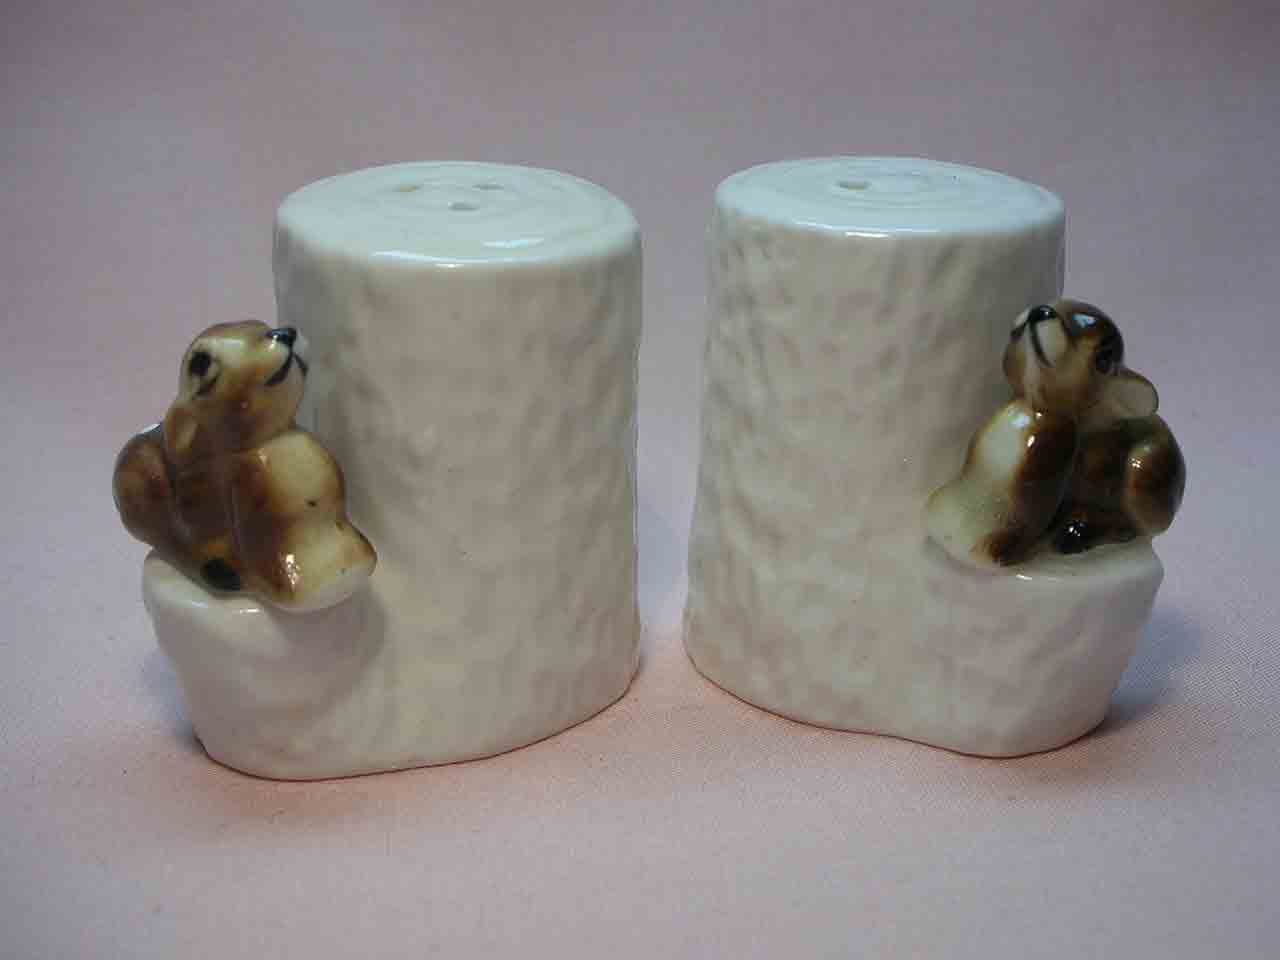 Bone China animals by white tree stumps salt and pepper shakers - deer